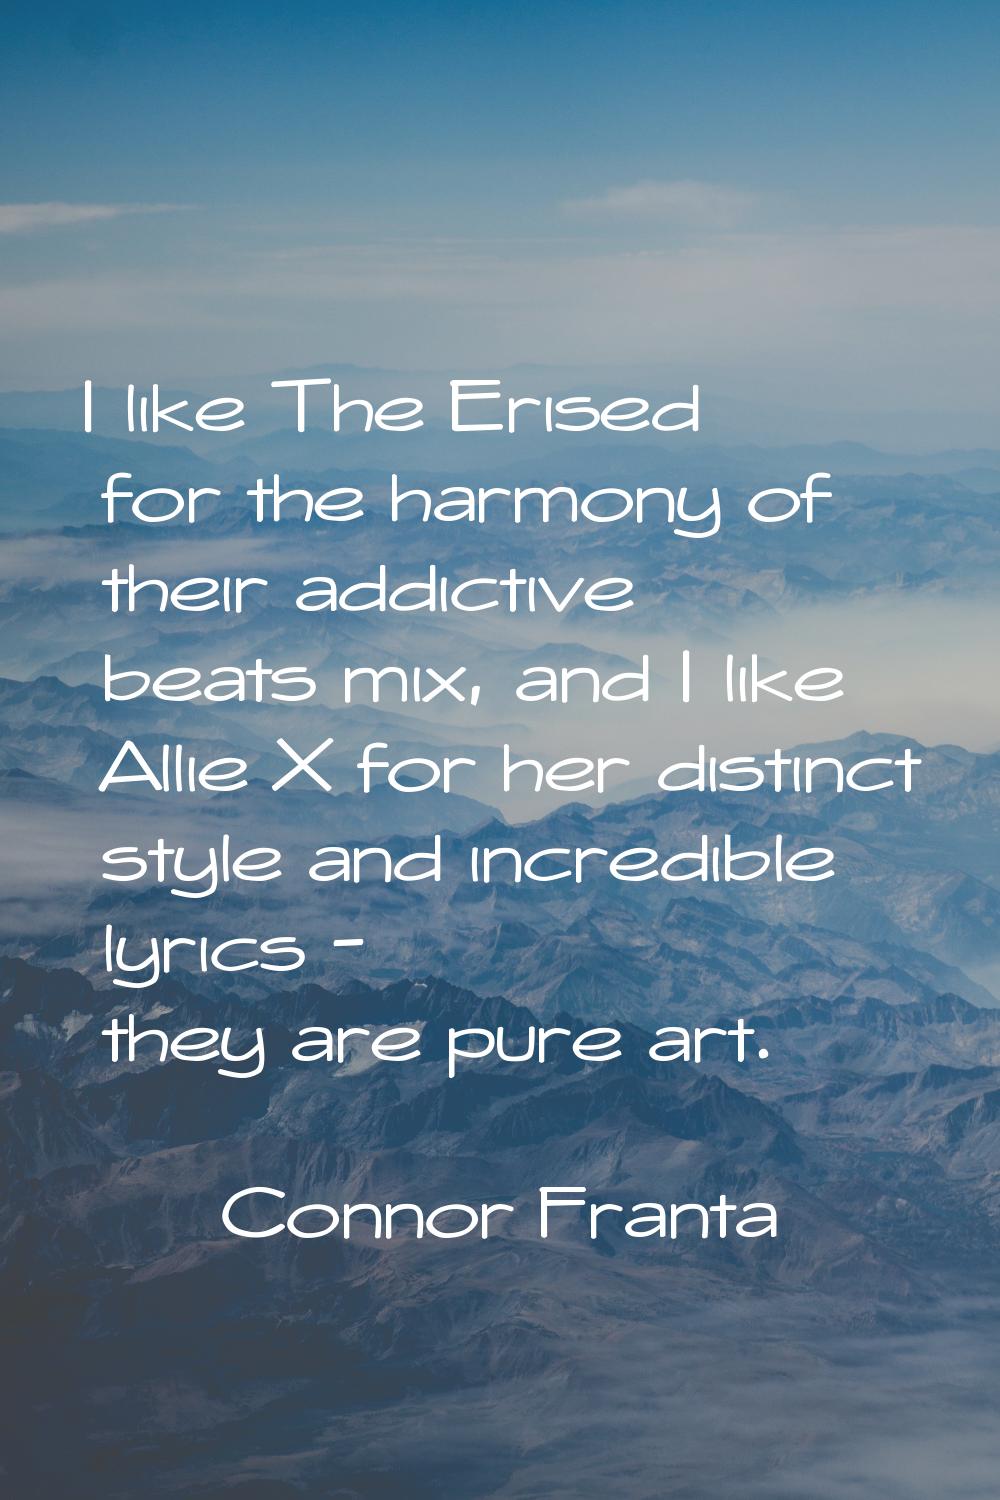 I like The Erised for the harmony of their addictive beats mix, and I like Allie X for her distinct